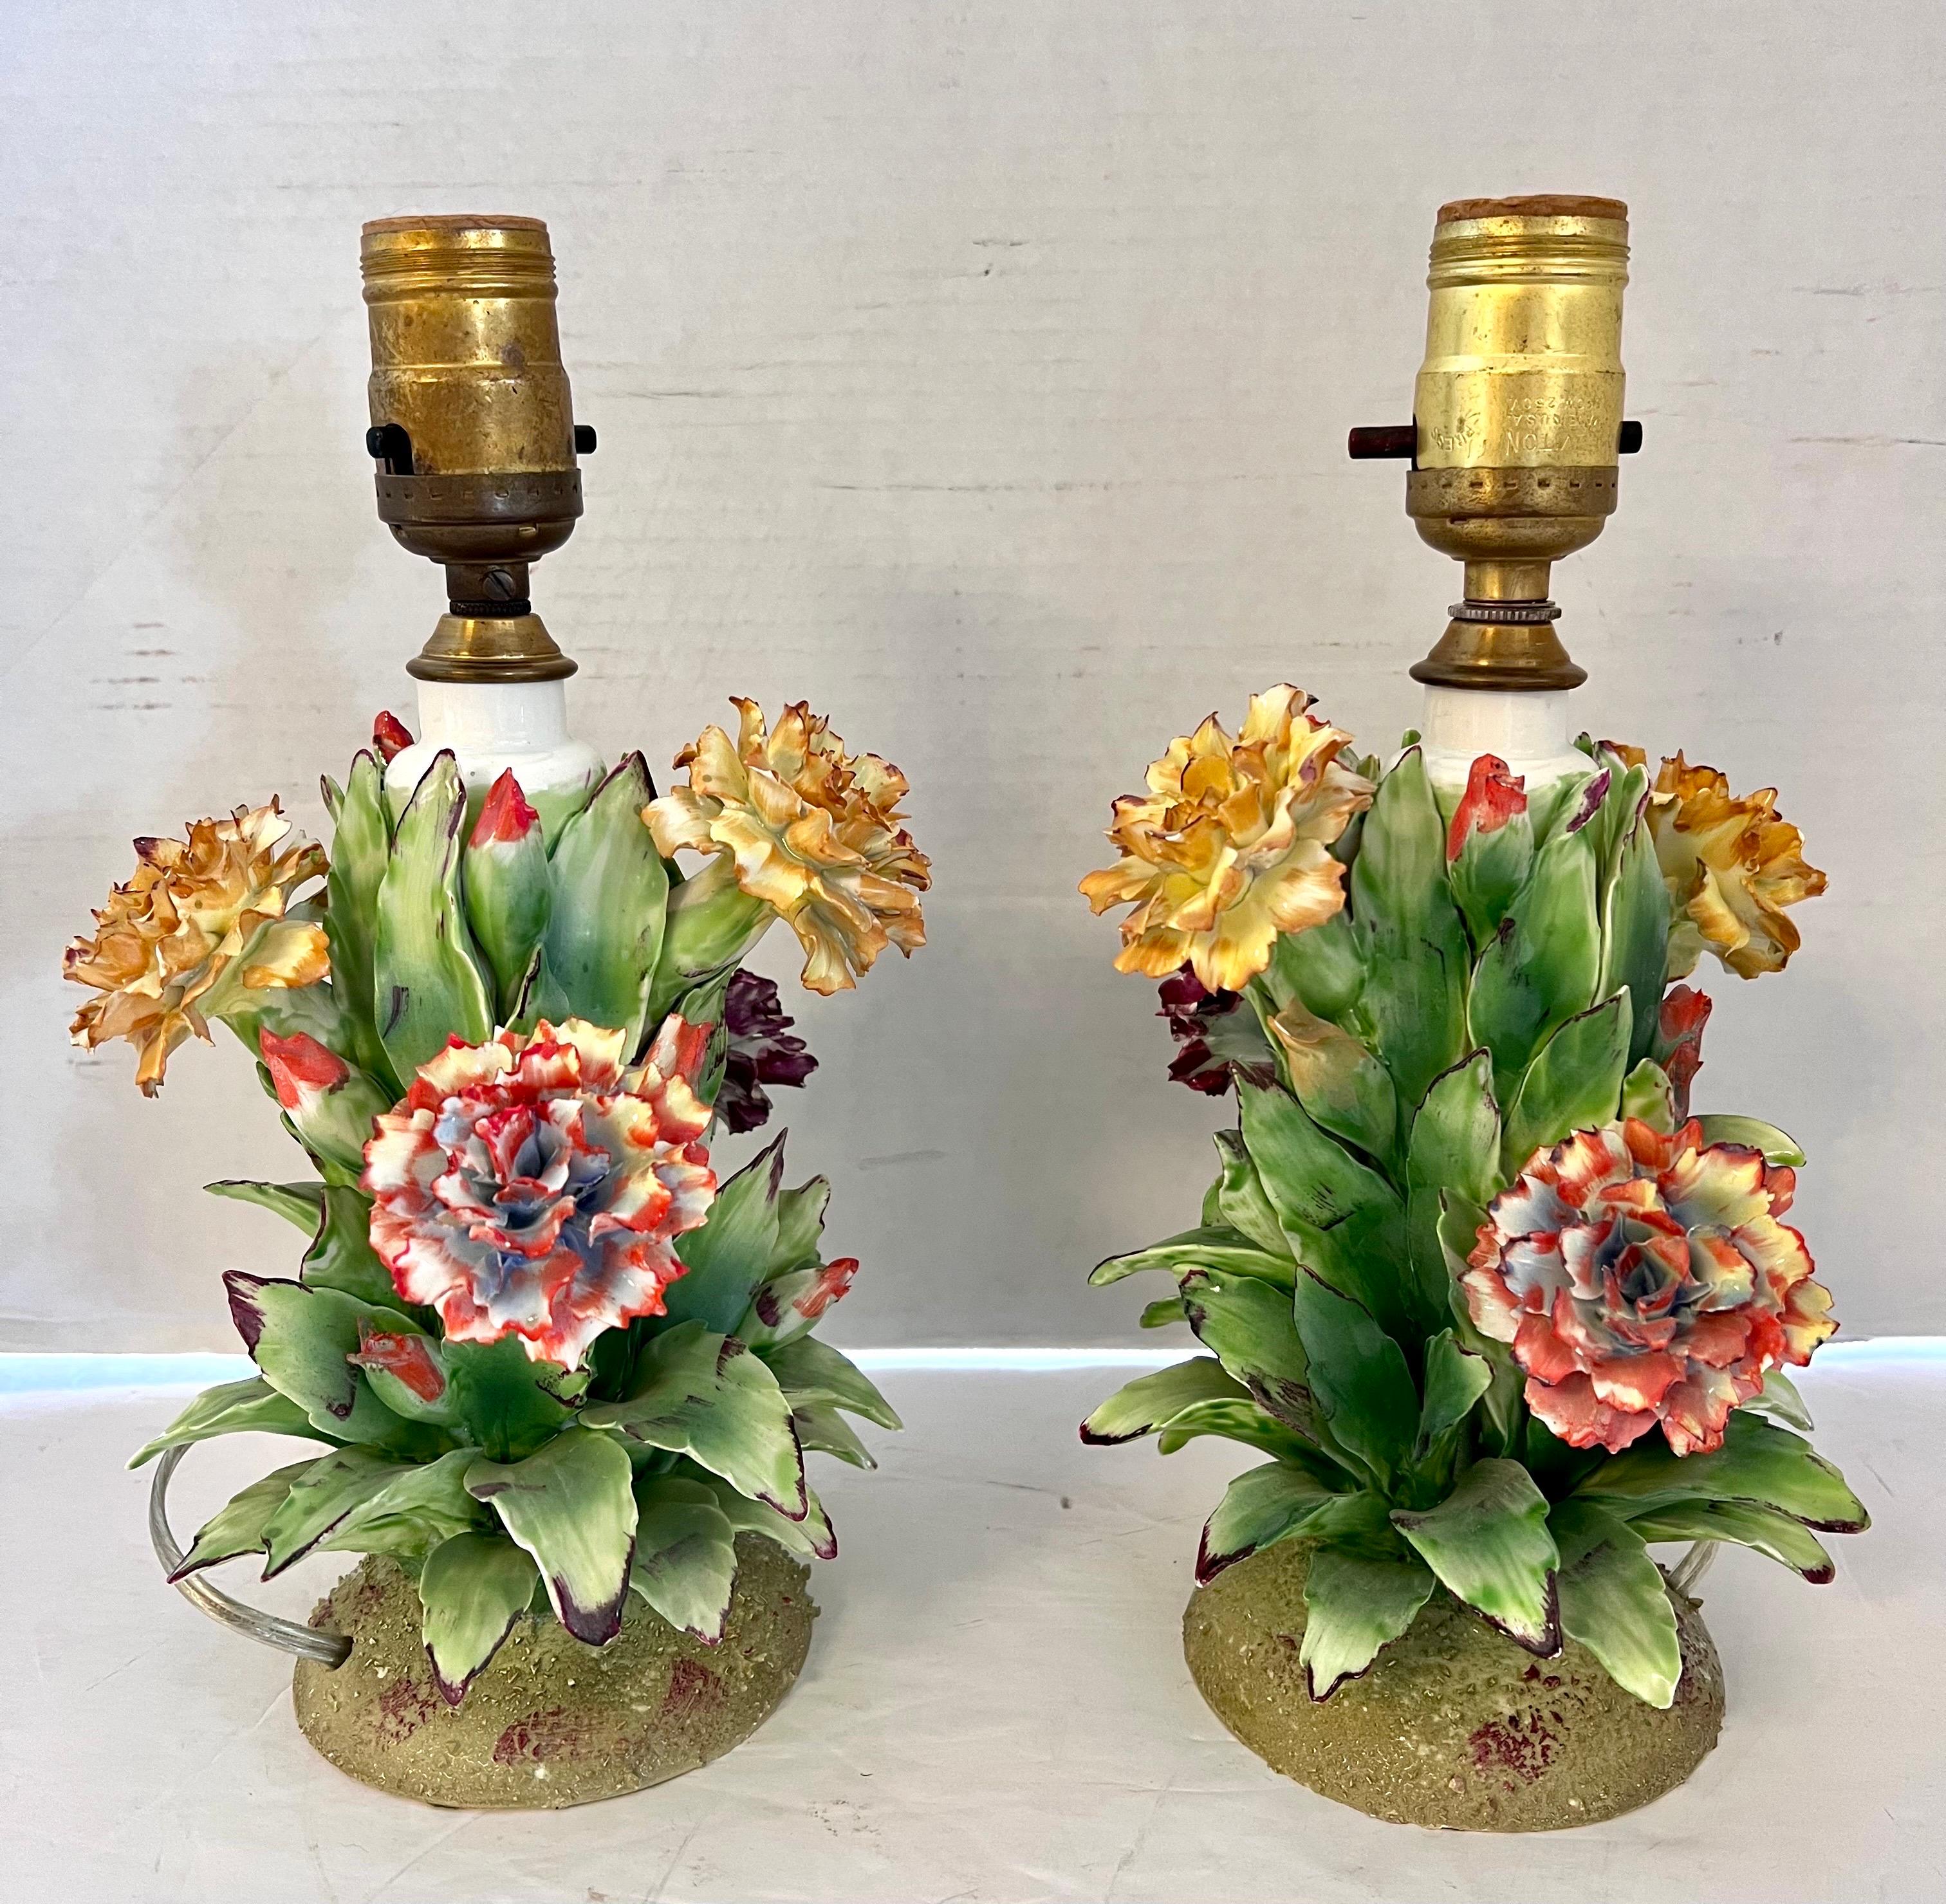 This pair of Capodimonte lamps look like works of art! They feature meticulously hand crafted porcelain flowers throughout and are quite diminutive - see dimensions above. Perfect for a bedroom! Wired and in perfect order.